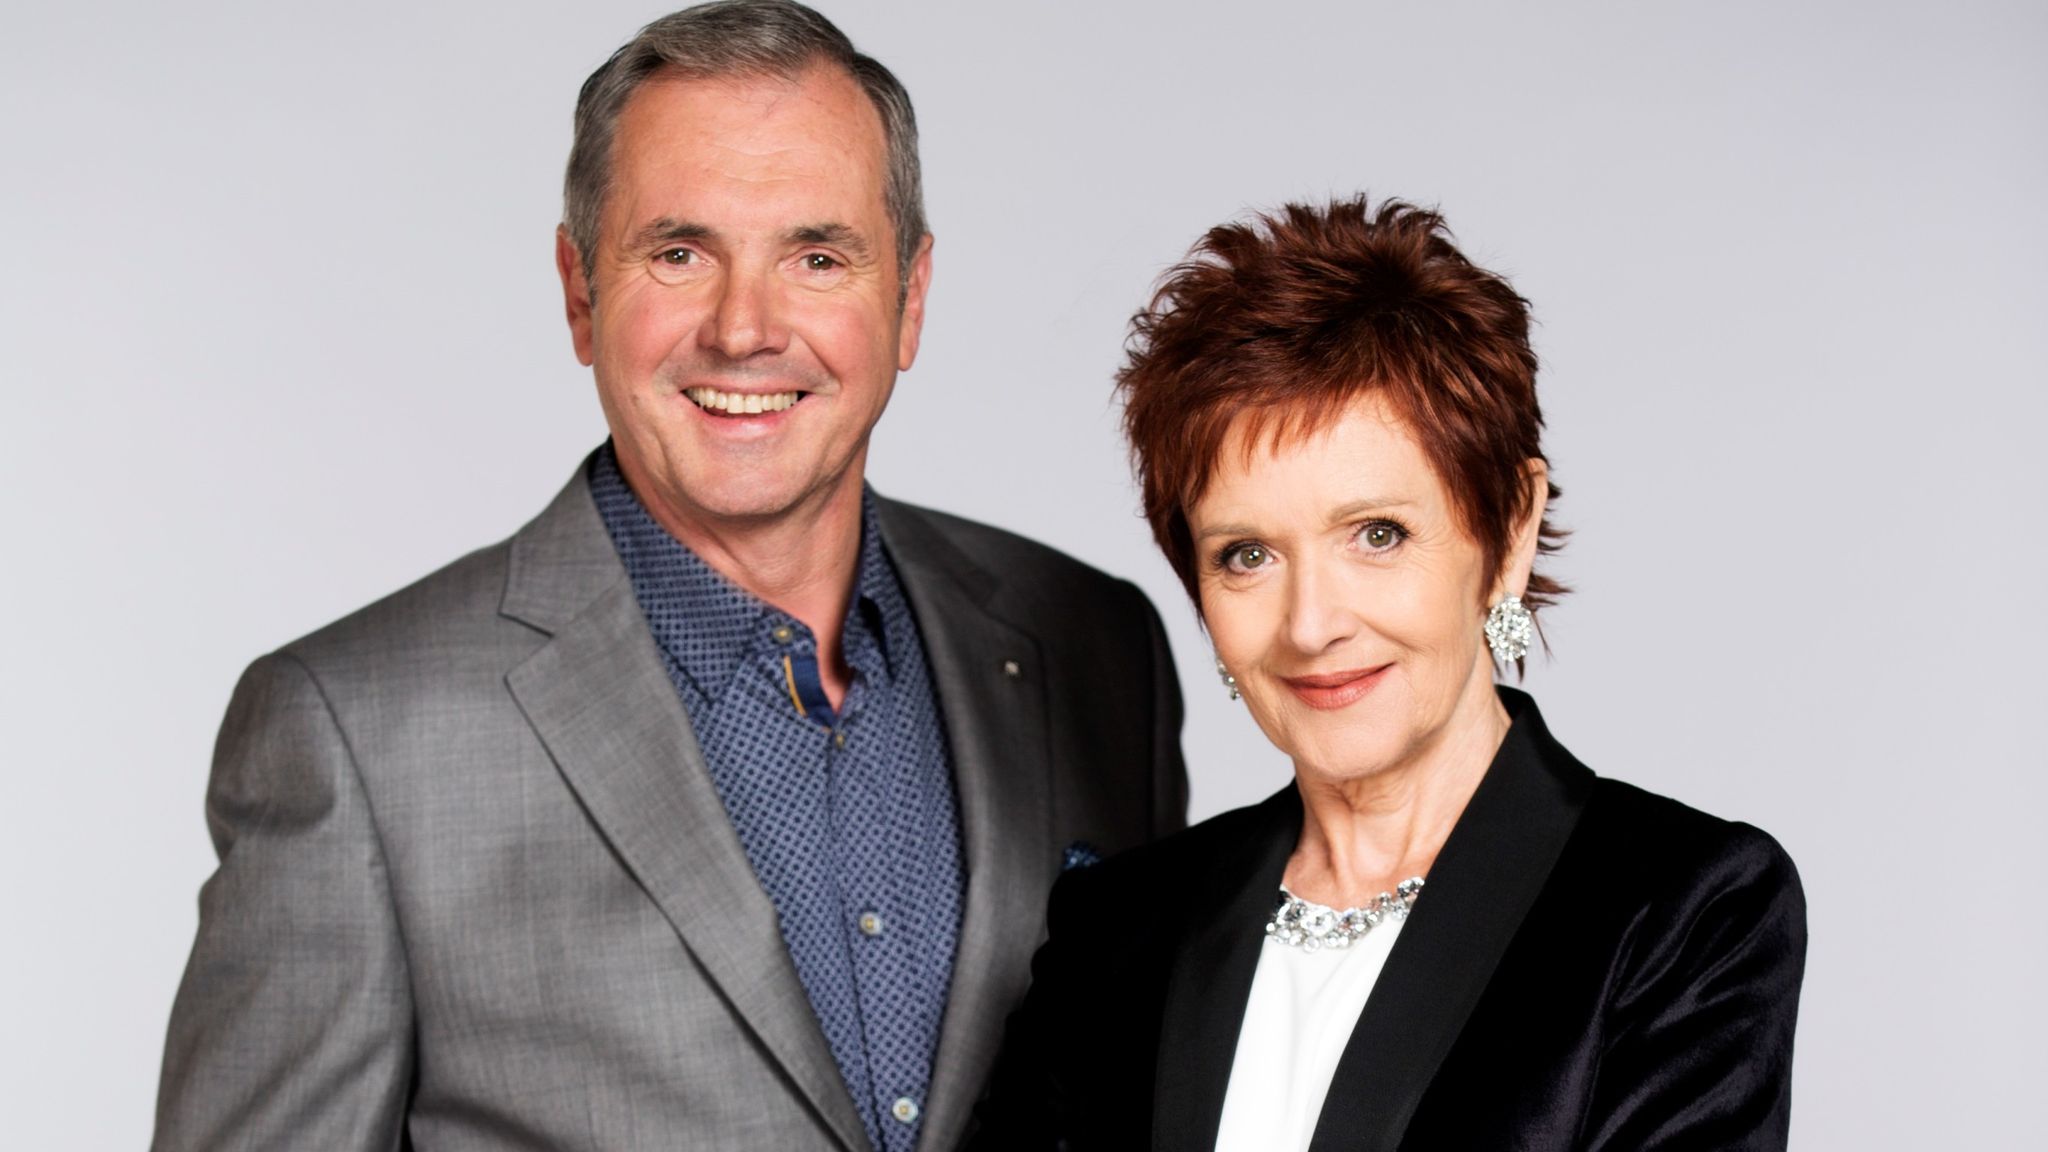 It's going to look odd': Neighbours to resume filming with actors 1.5  metres apart and kissing banned, The Independent